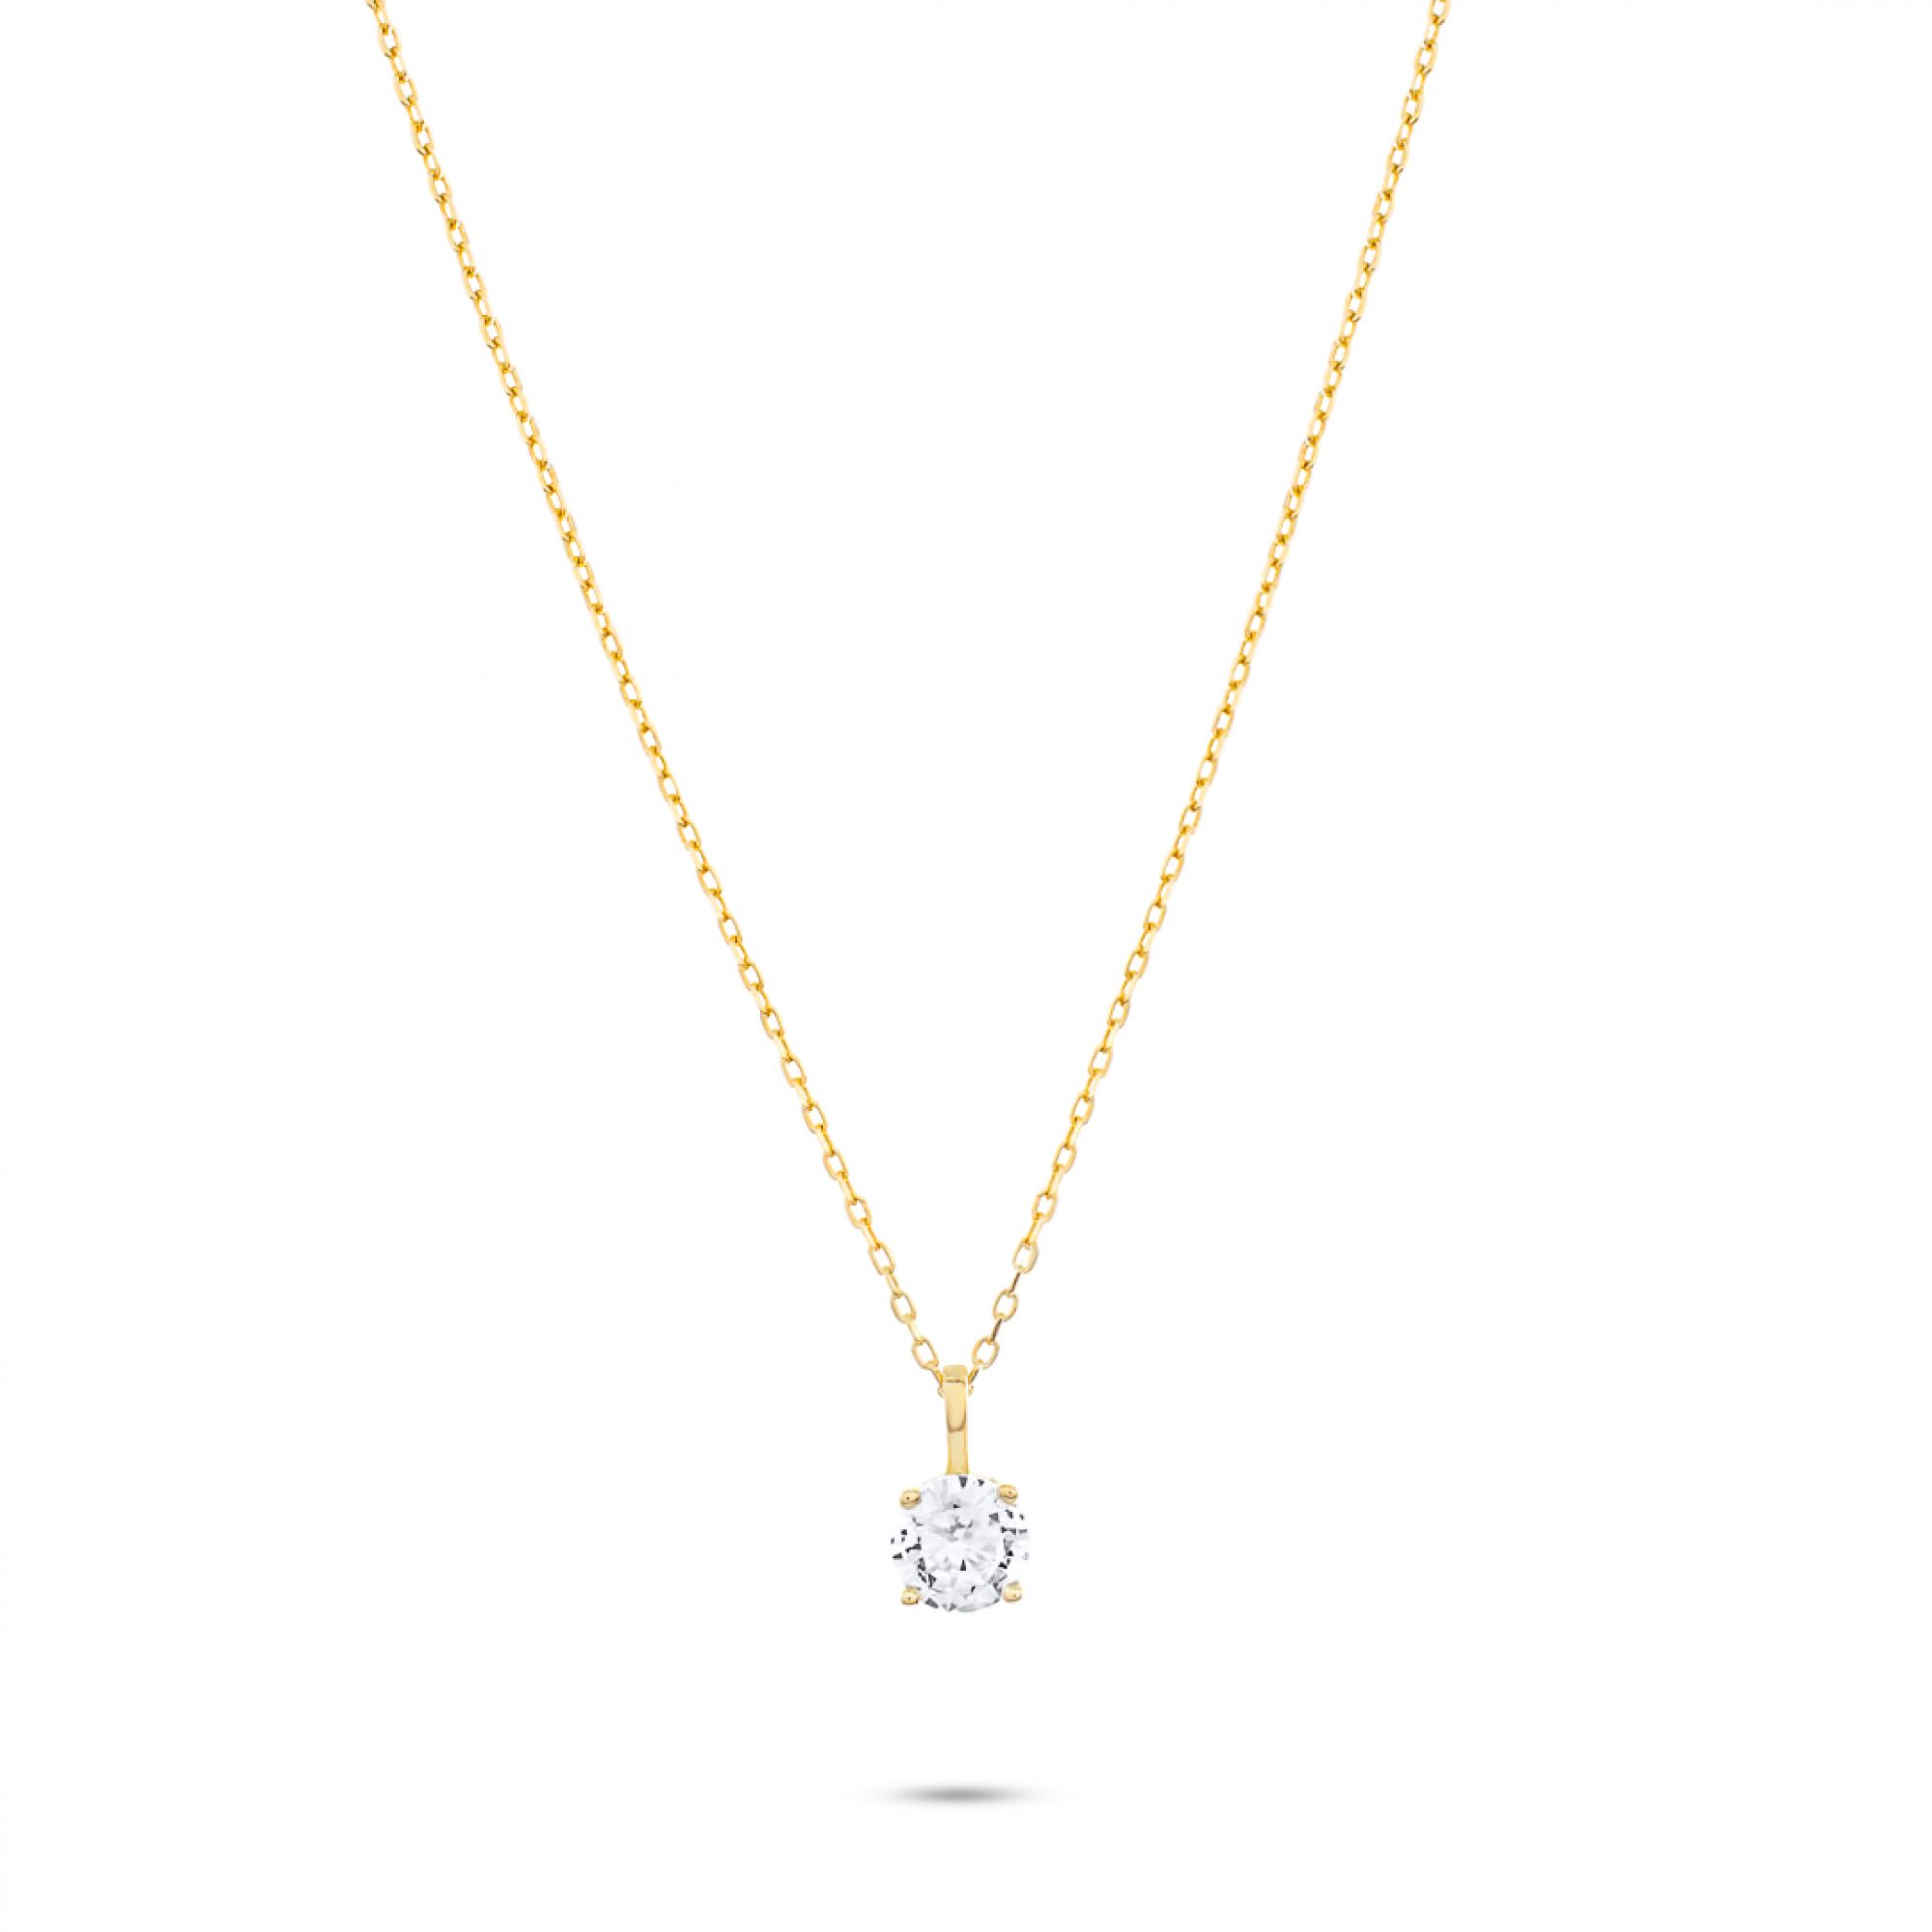 Gold plated necklace with zircon stone